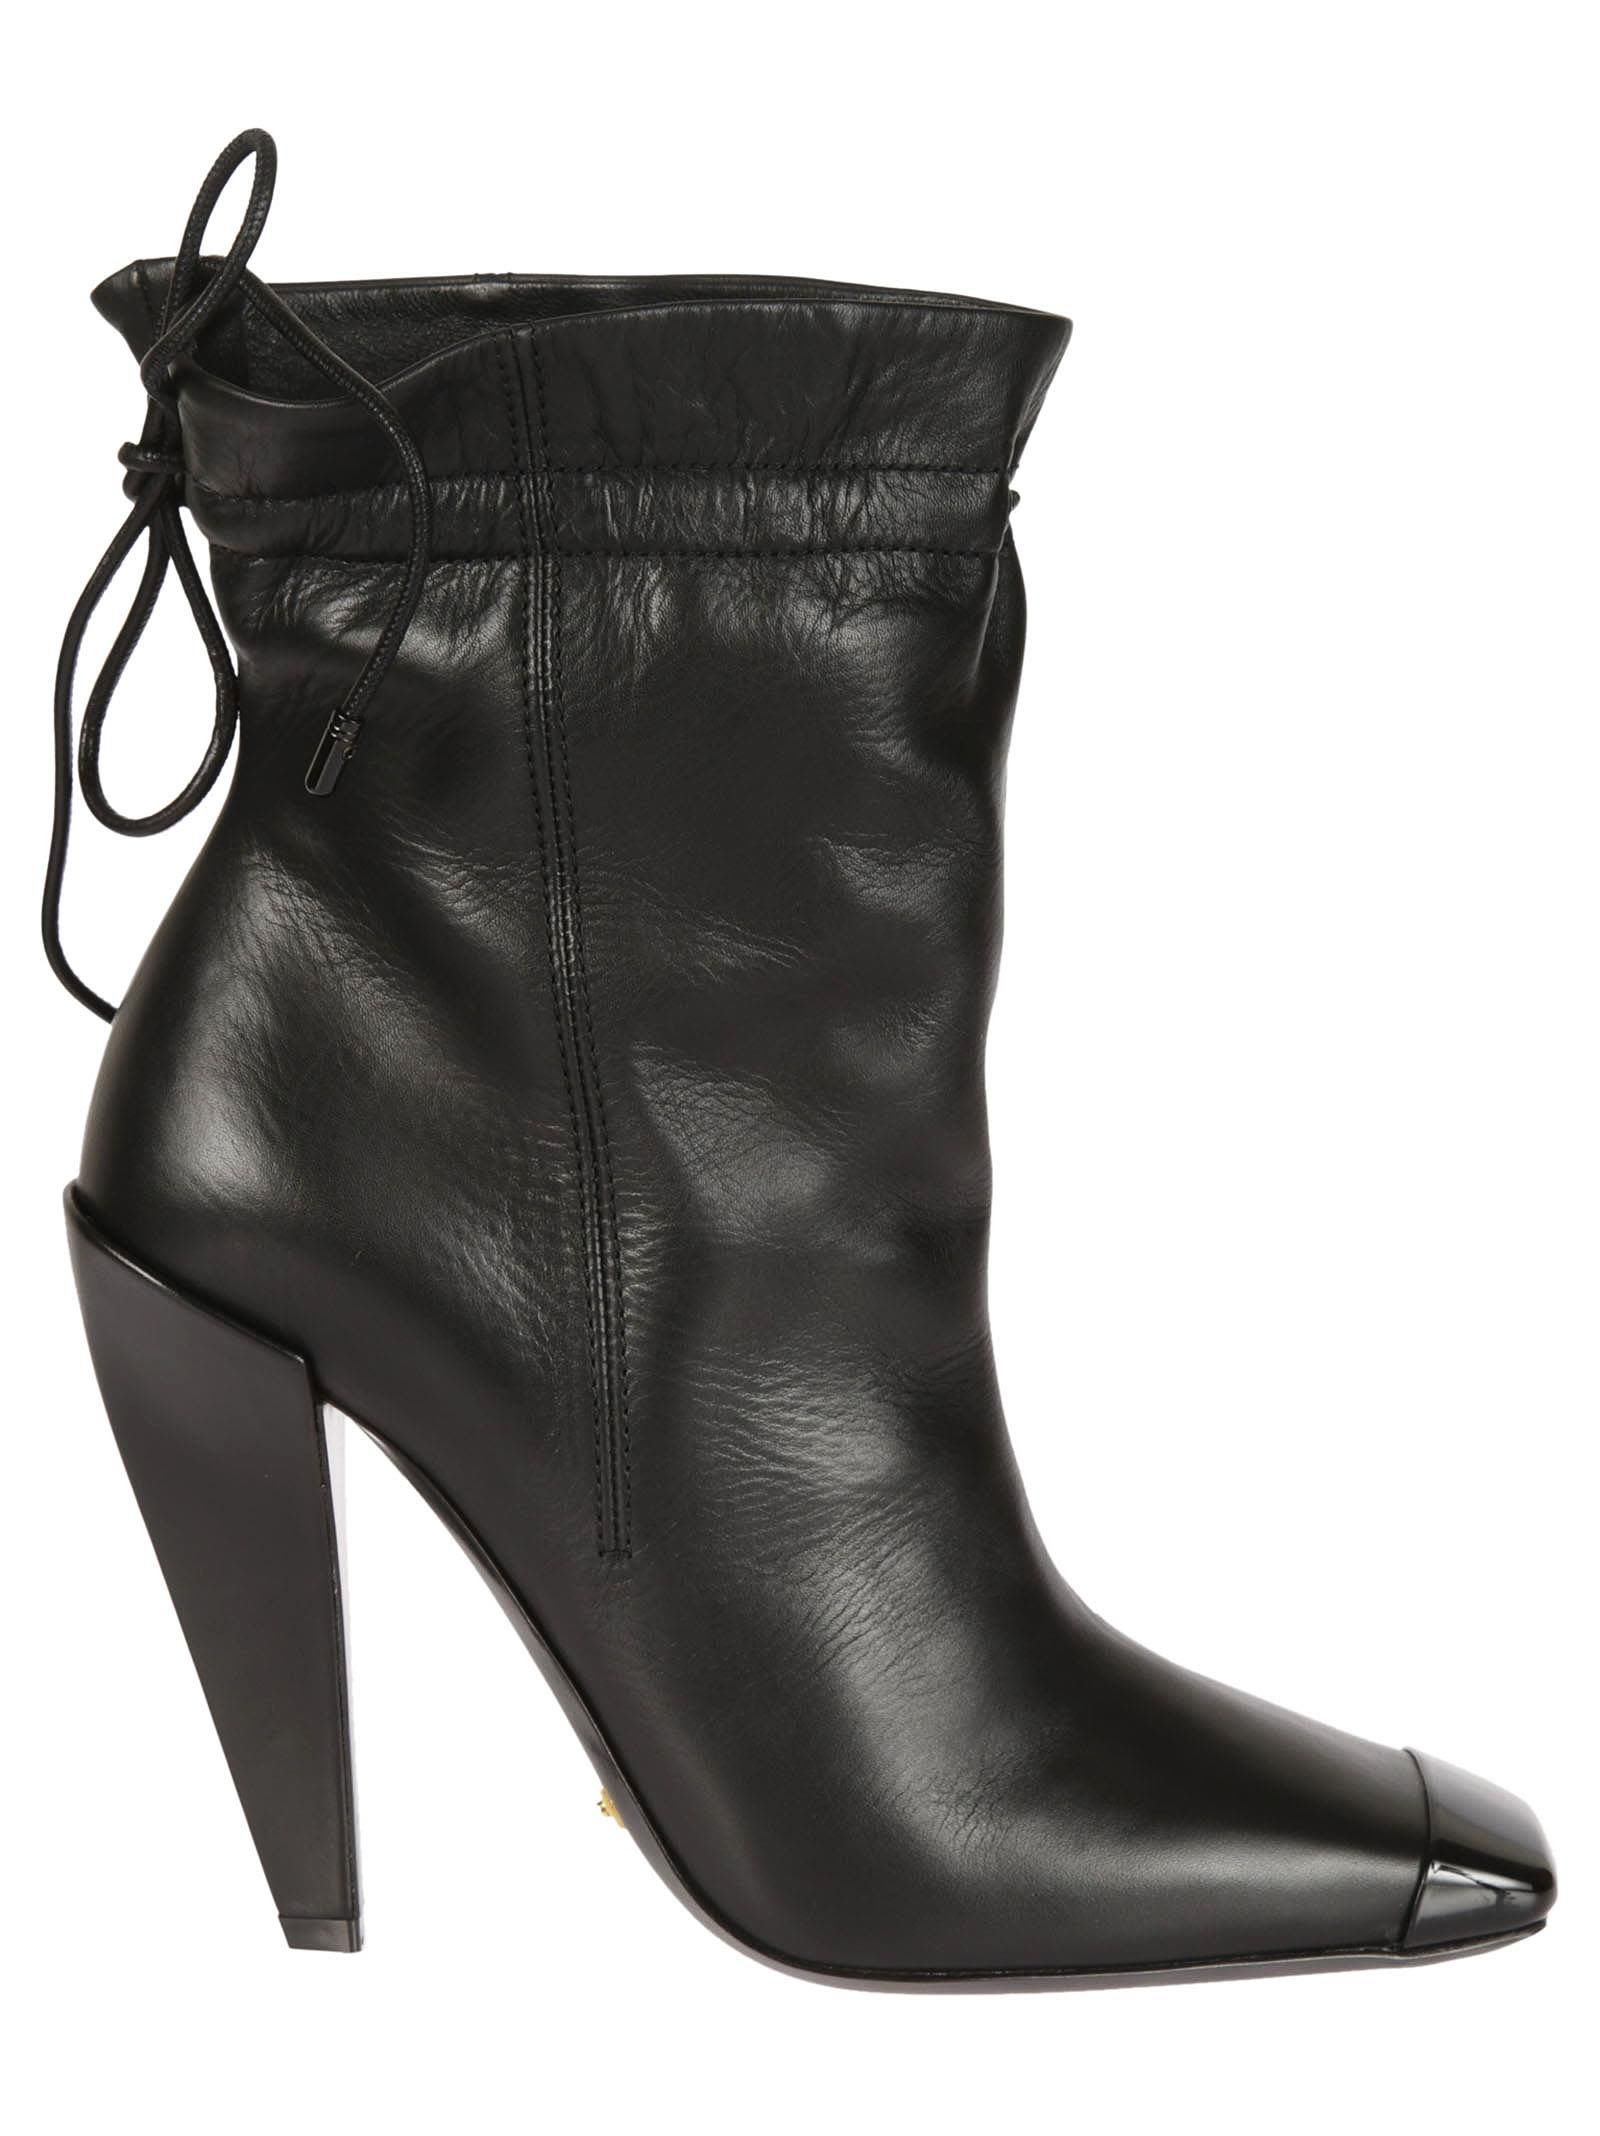 Tom Ford Drawstring Ankle Boots | Italist.com US